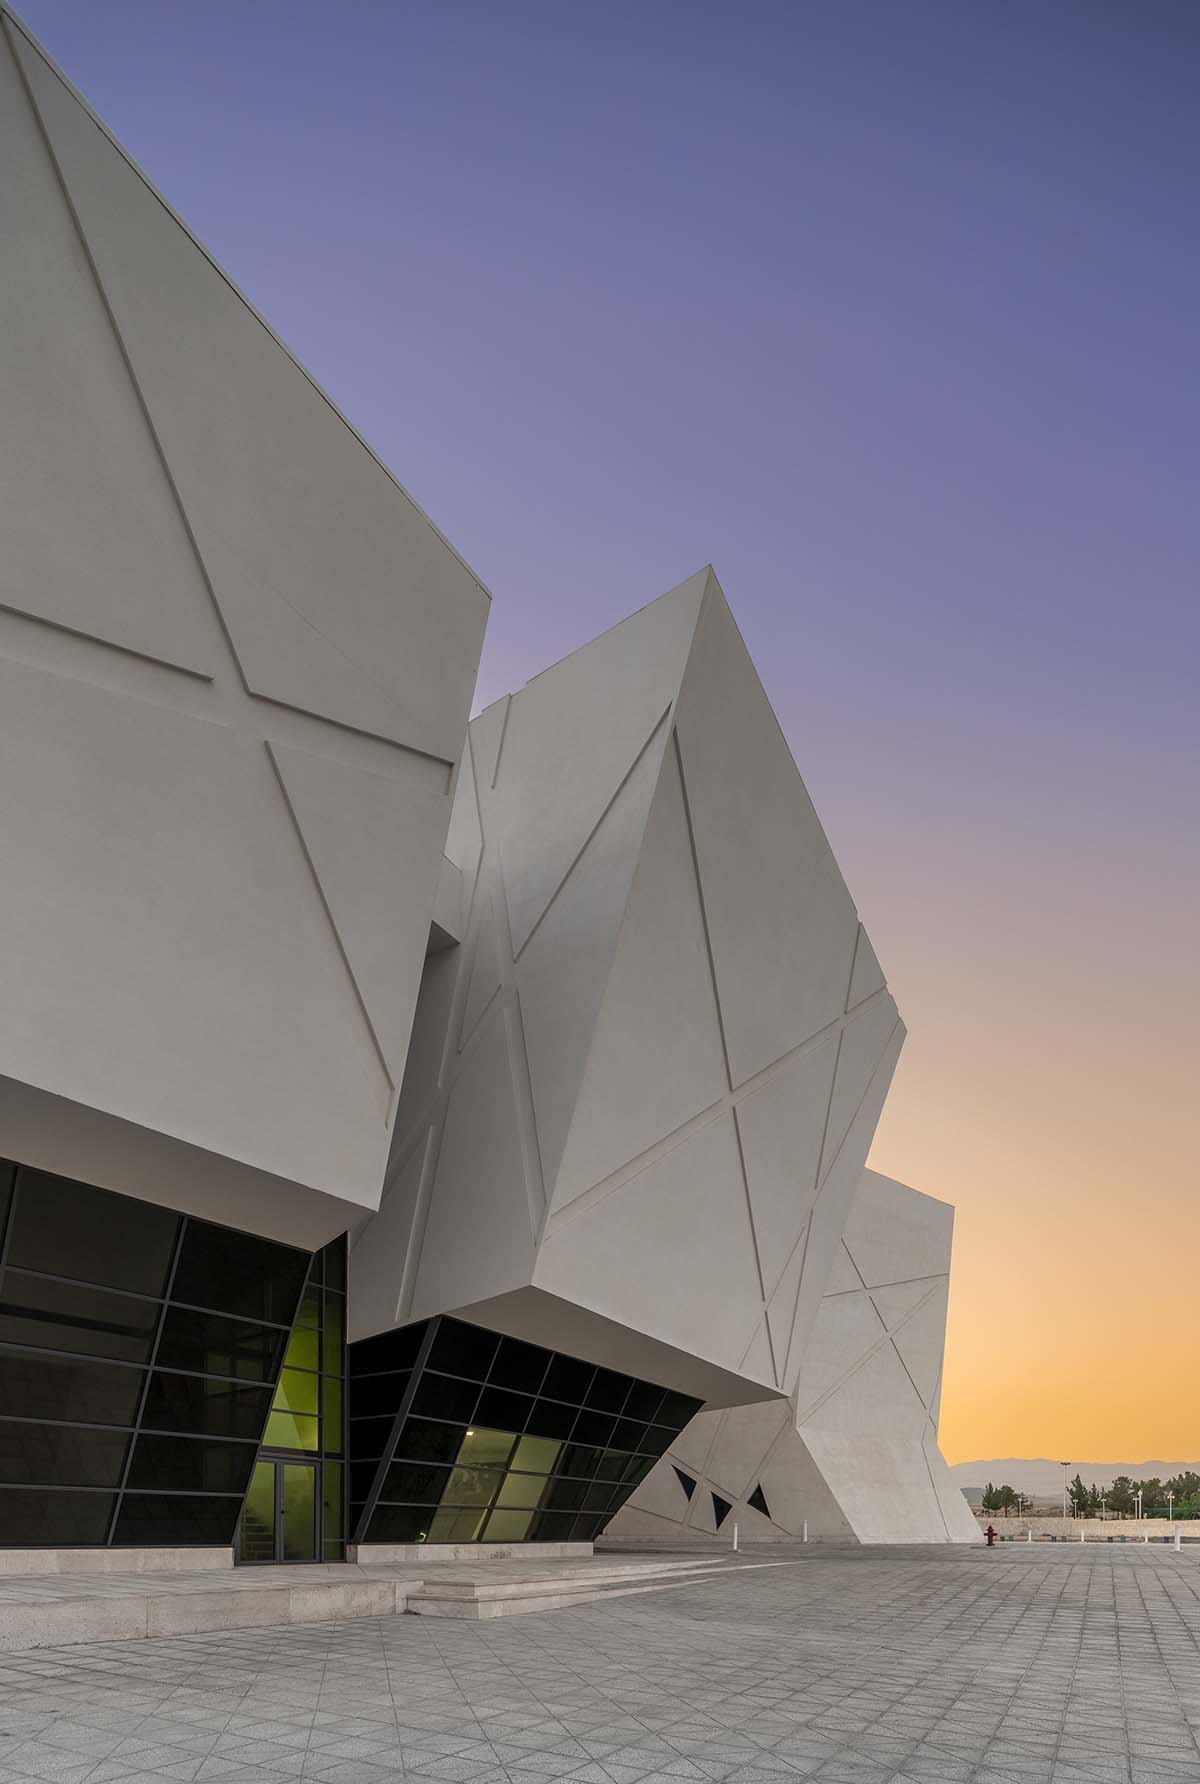 New monolithic auditorium and library at Semnan University features intricate openings and ribbons 